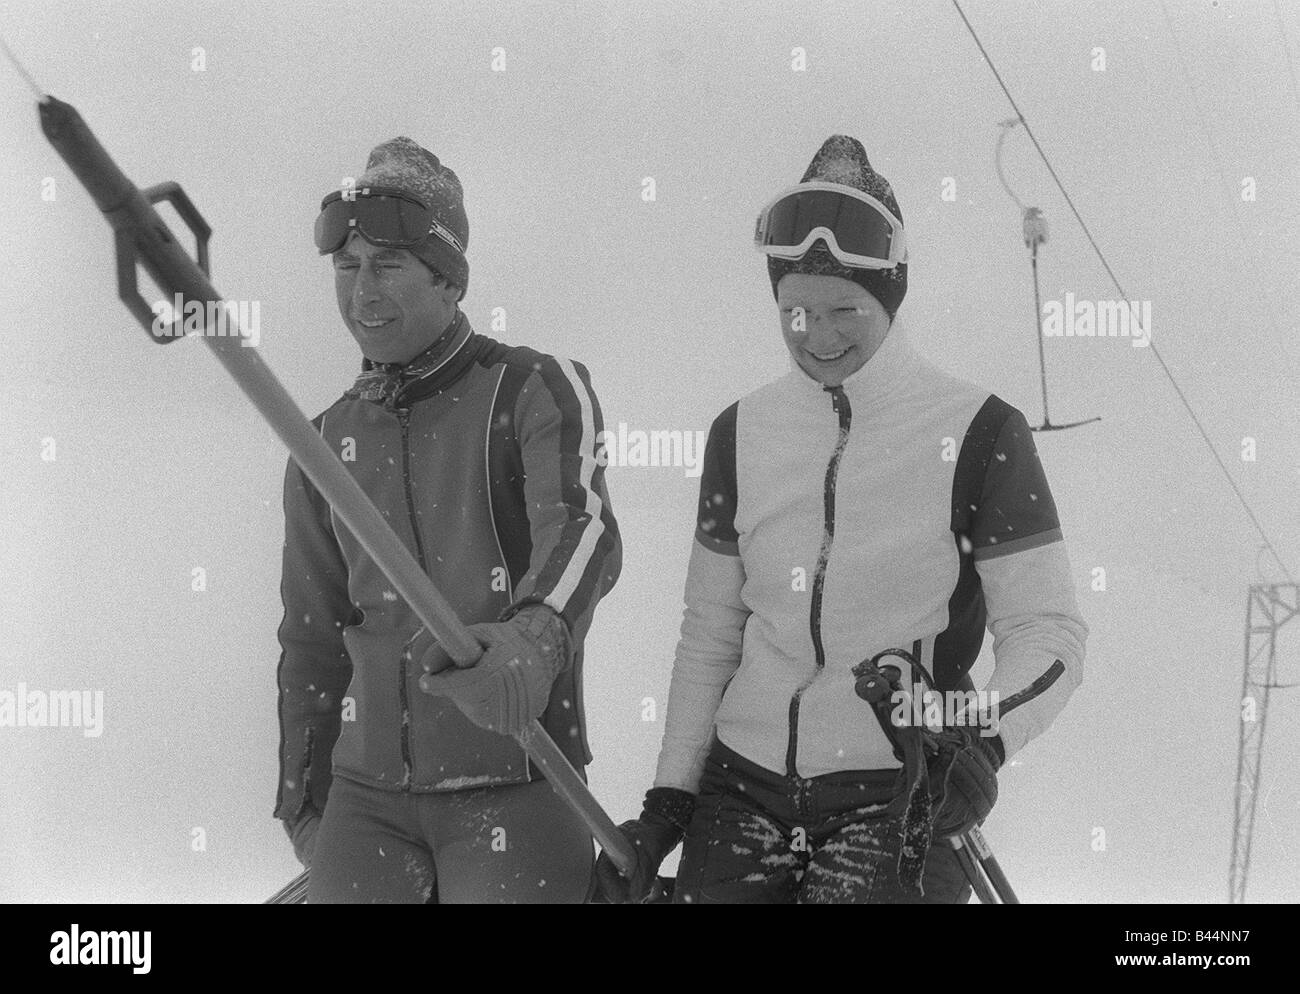 Prince Charles with Lady Sarah Spencer sharing a ski lift chair in Switzerland Wearing goggles and ski suit in 1970s Stock Photo